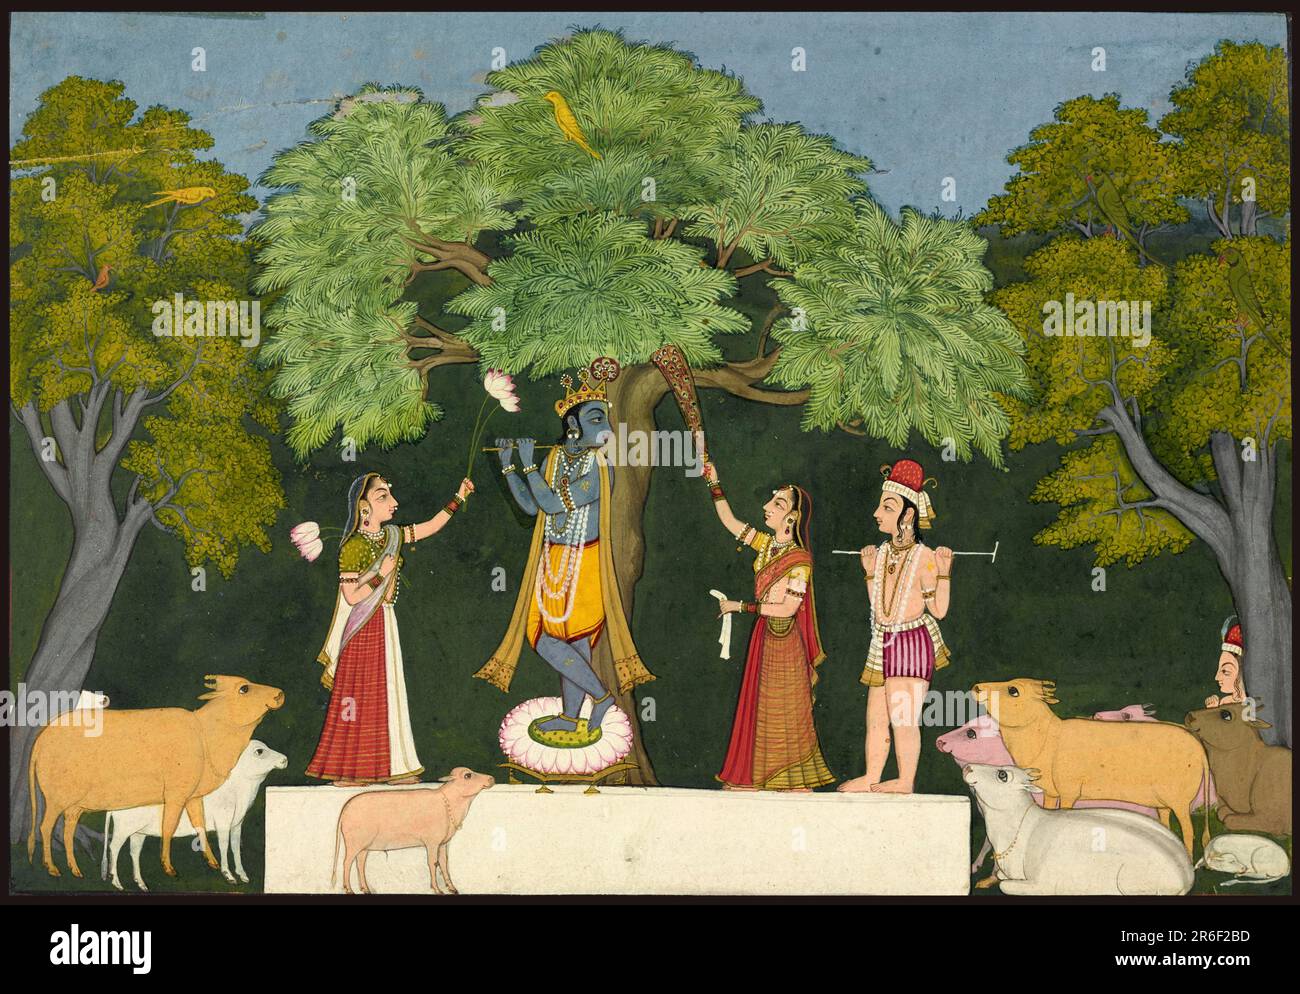 Krishna entertains his companions. Opaque watercolor and gold on paper. Origin: Guler or Chamba, Himachal Pradesh state, India. Date: ca. 1760-1765. Museum: Freer Gallery of Art and Arthur M. Sackler Gallery. Stock Photo